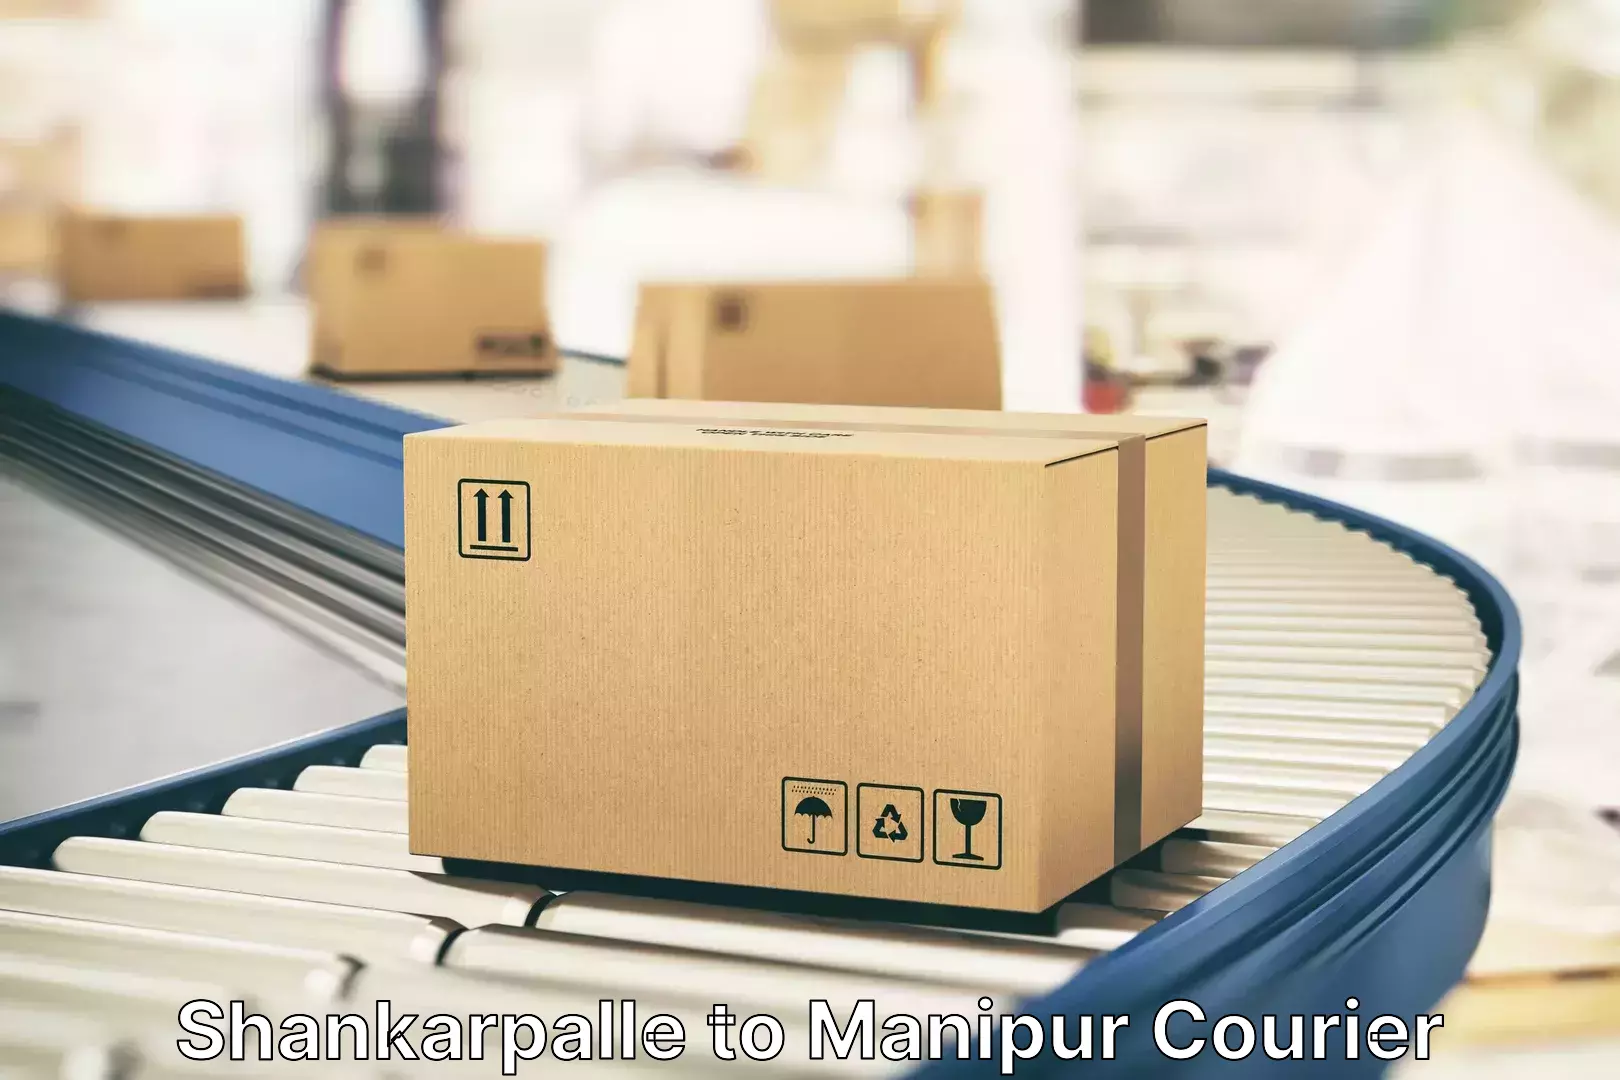 Luggage shipment tracking Shankarpalle to Manipur